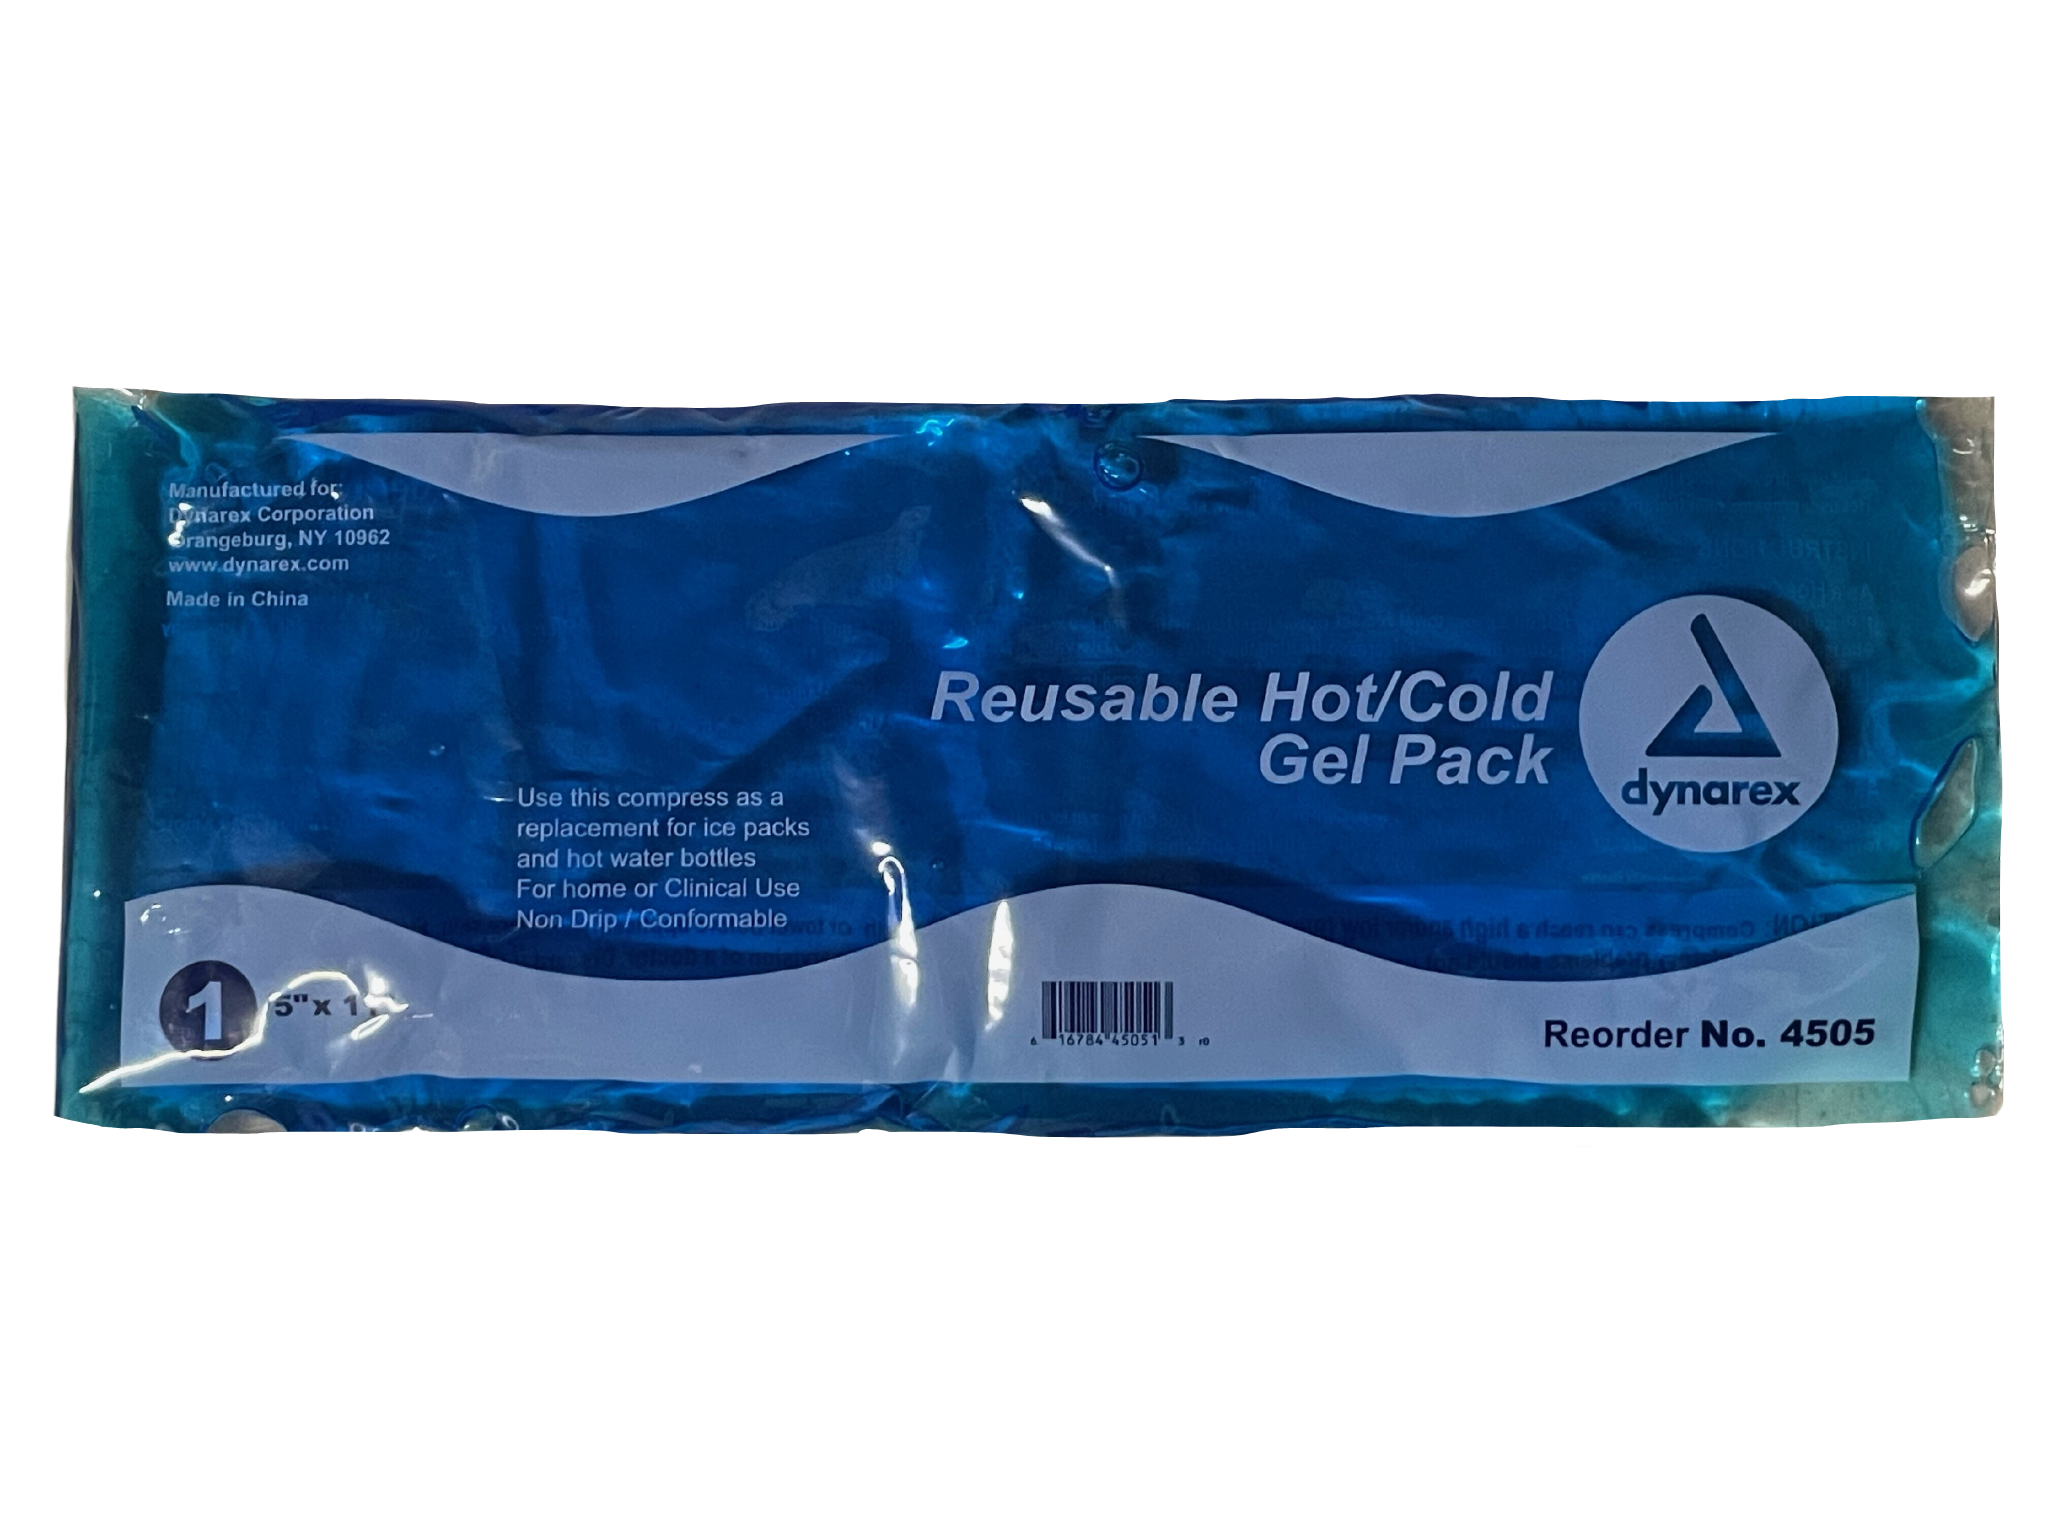 Reusable Hot/Cold Gel Pack, 5''x11''